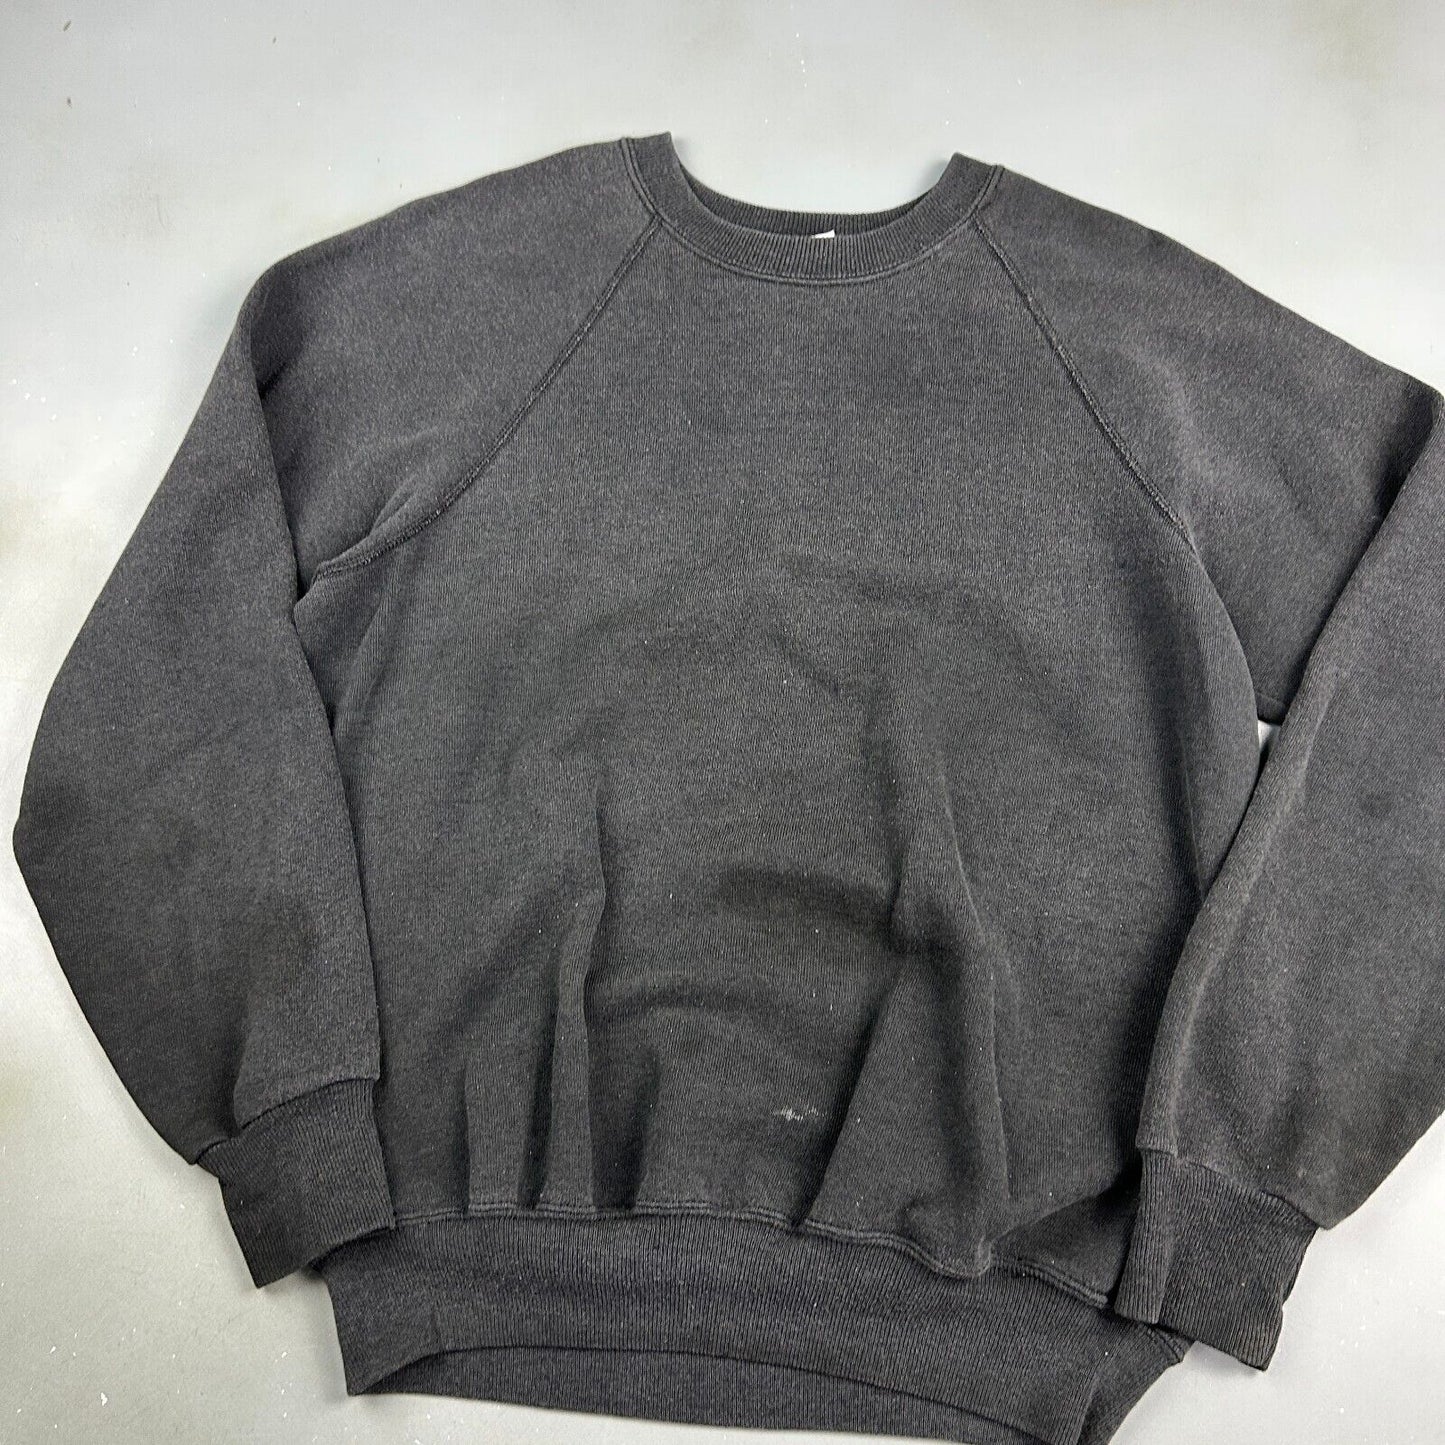 VINTAGE 90s Blank Faded Black Lee Midweight Crewneck Sweater sz Small Adult